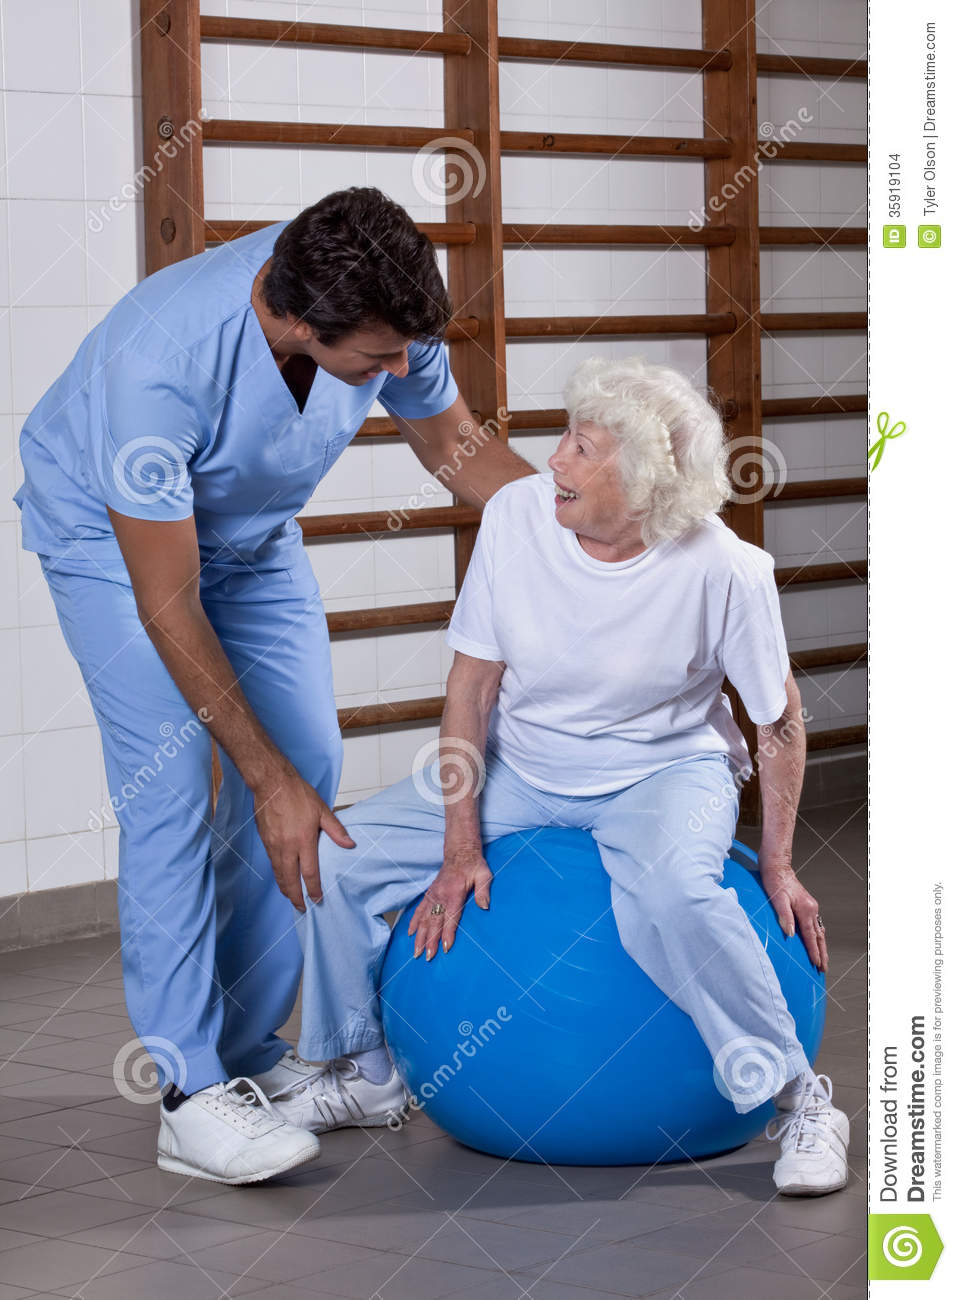 Stock Images  Physical Therapist Helping A Patient